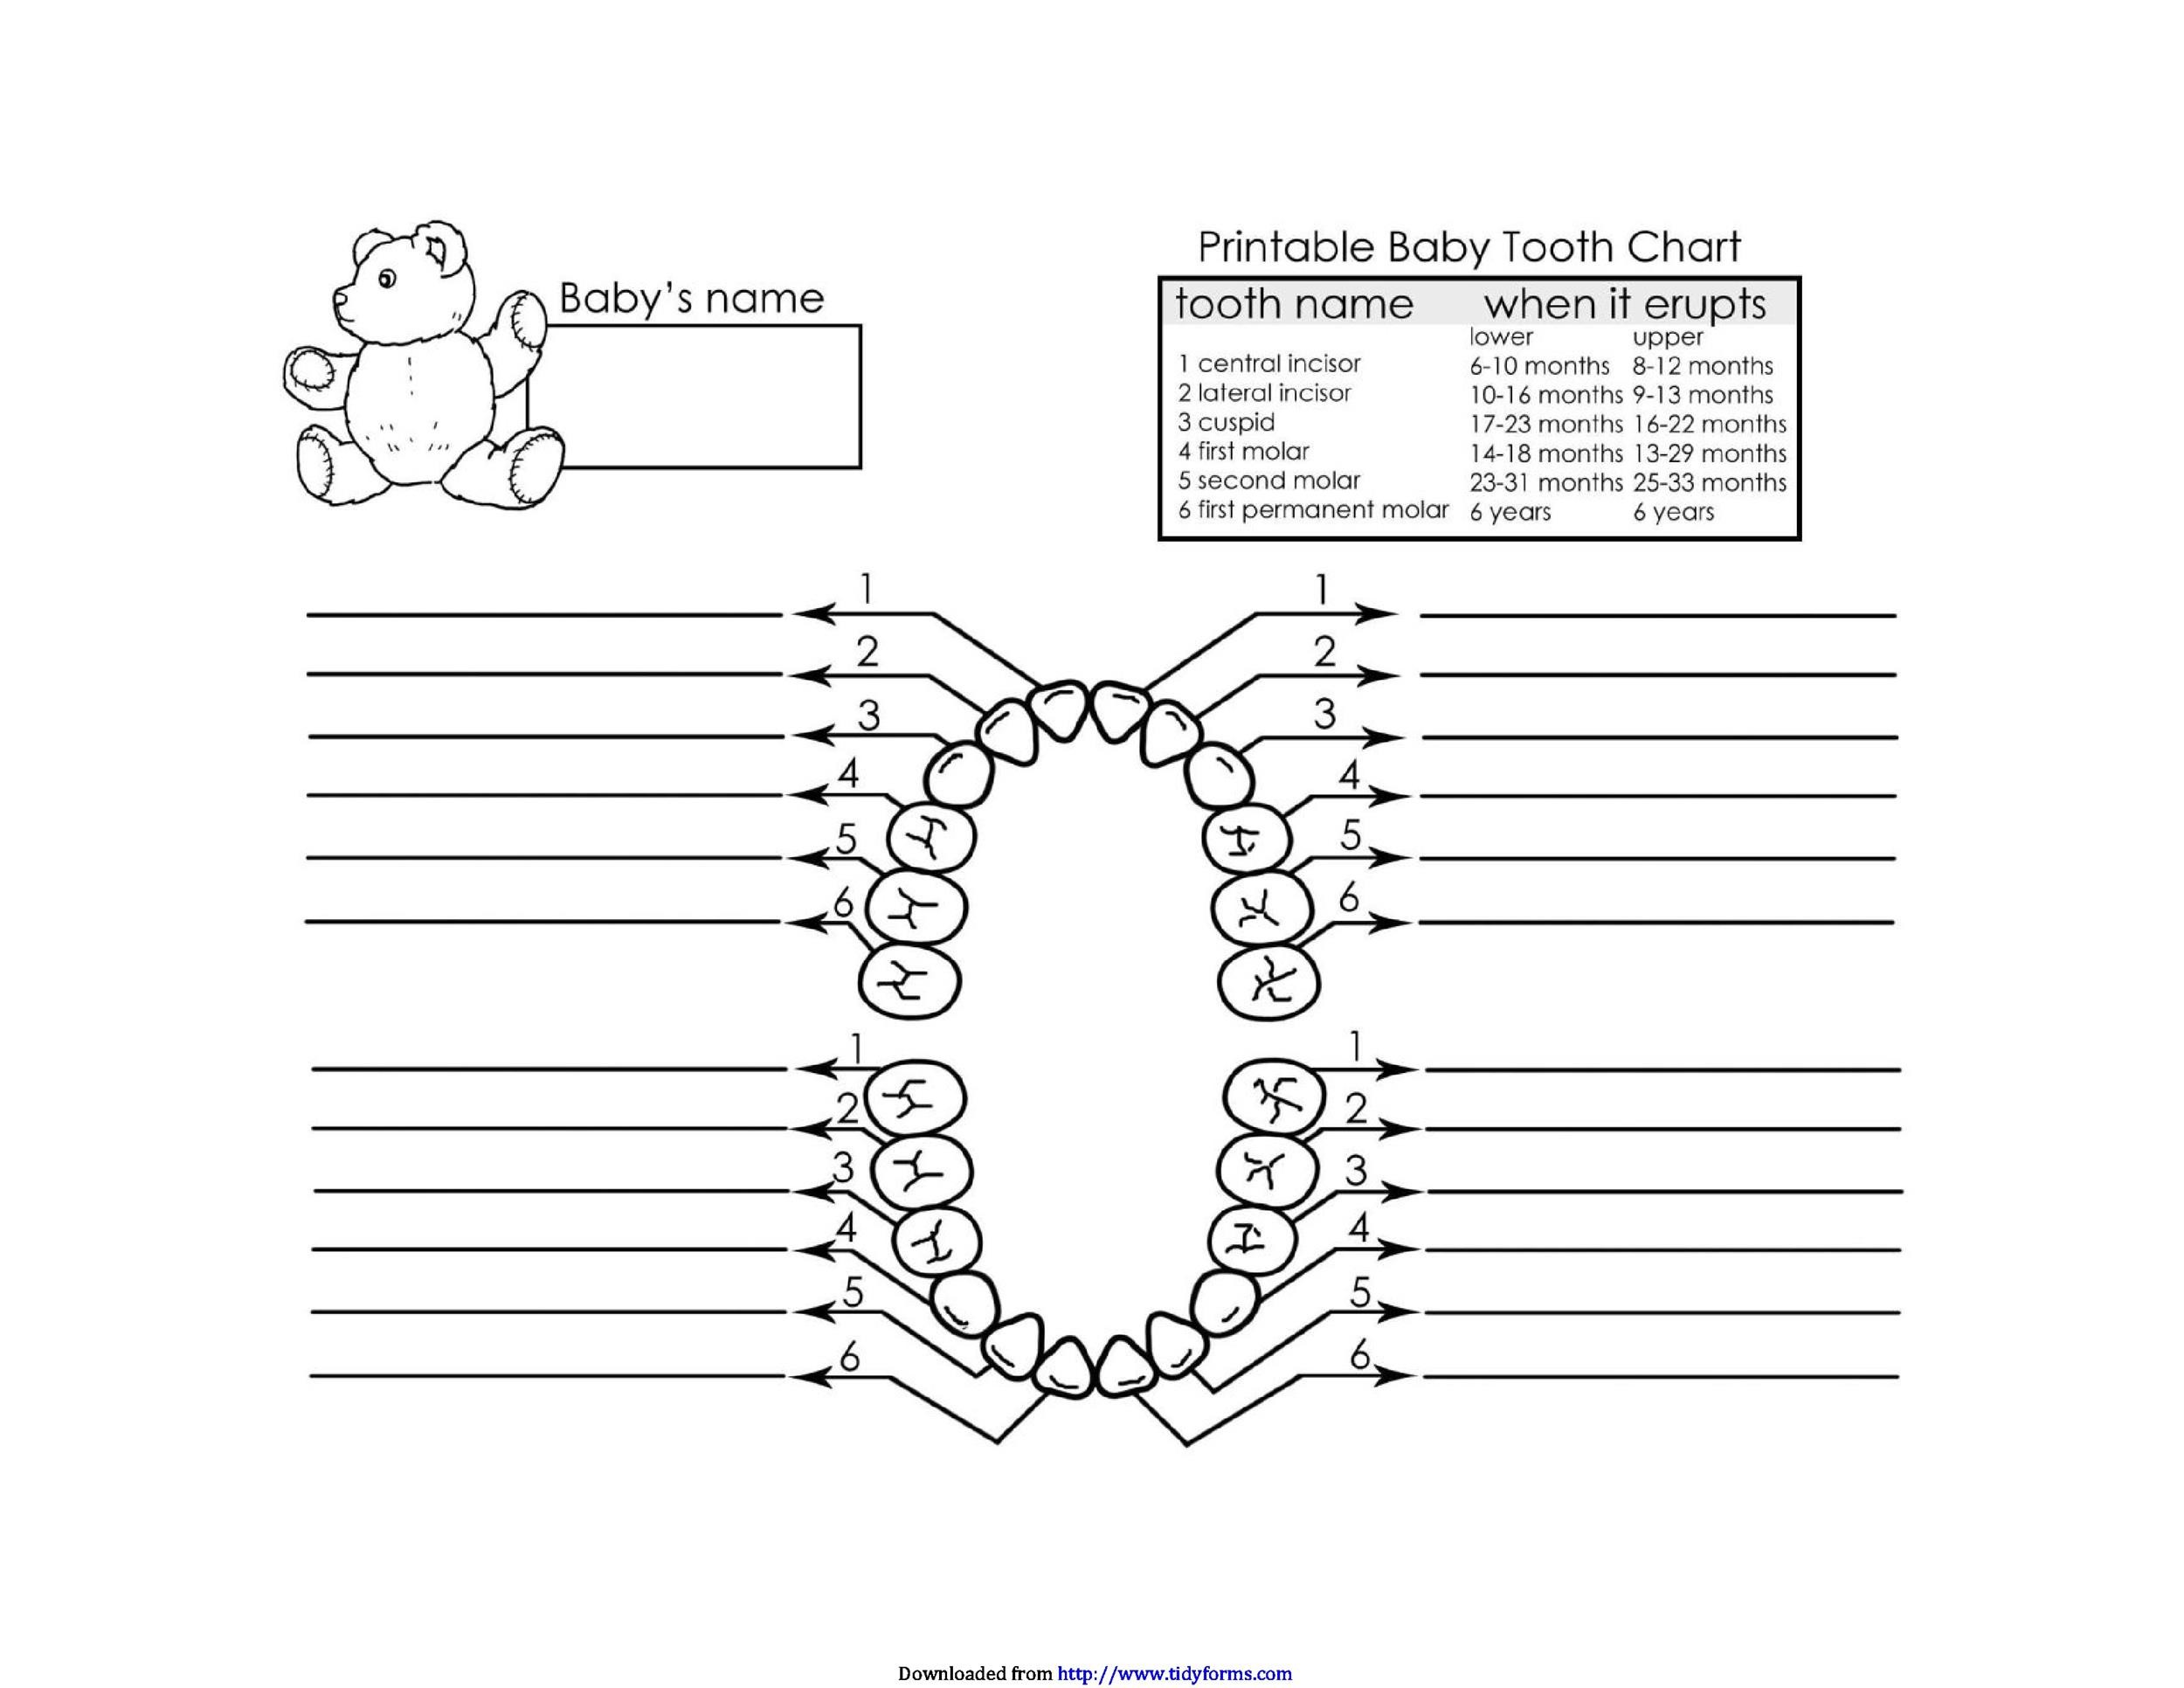 tooth-chart-with-numbers-printable-it-can-help-when-it-comes-to